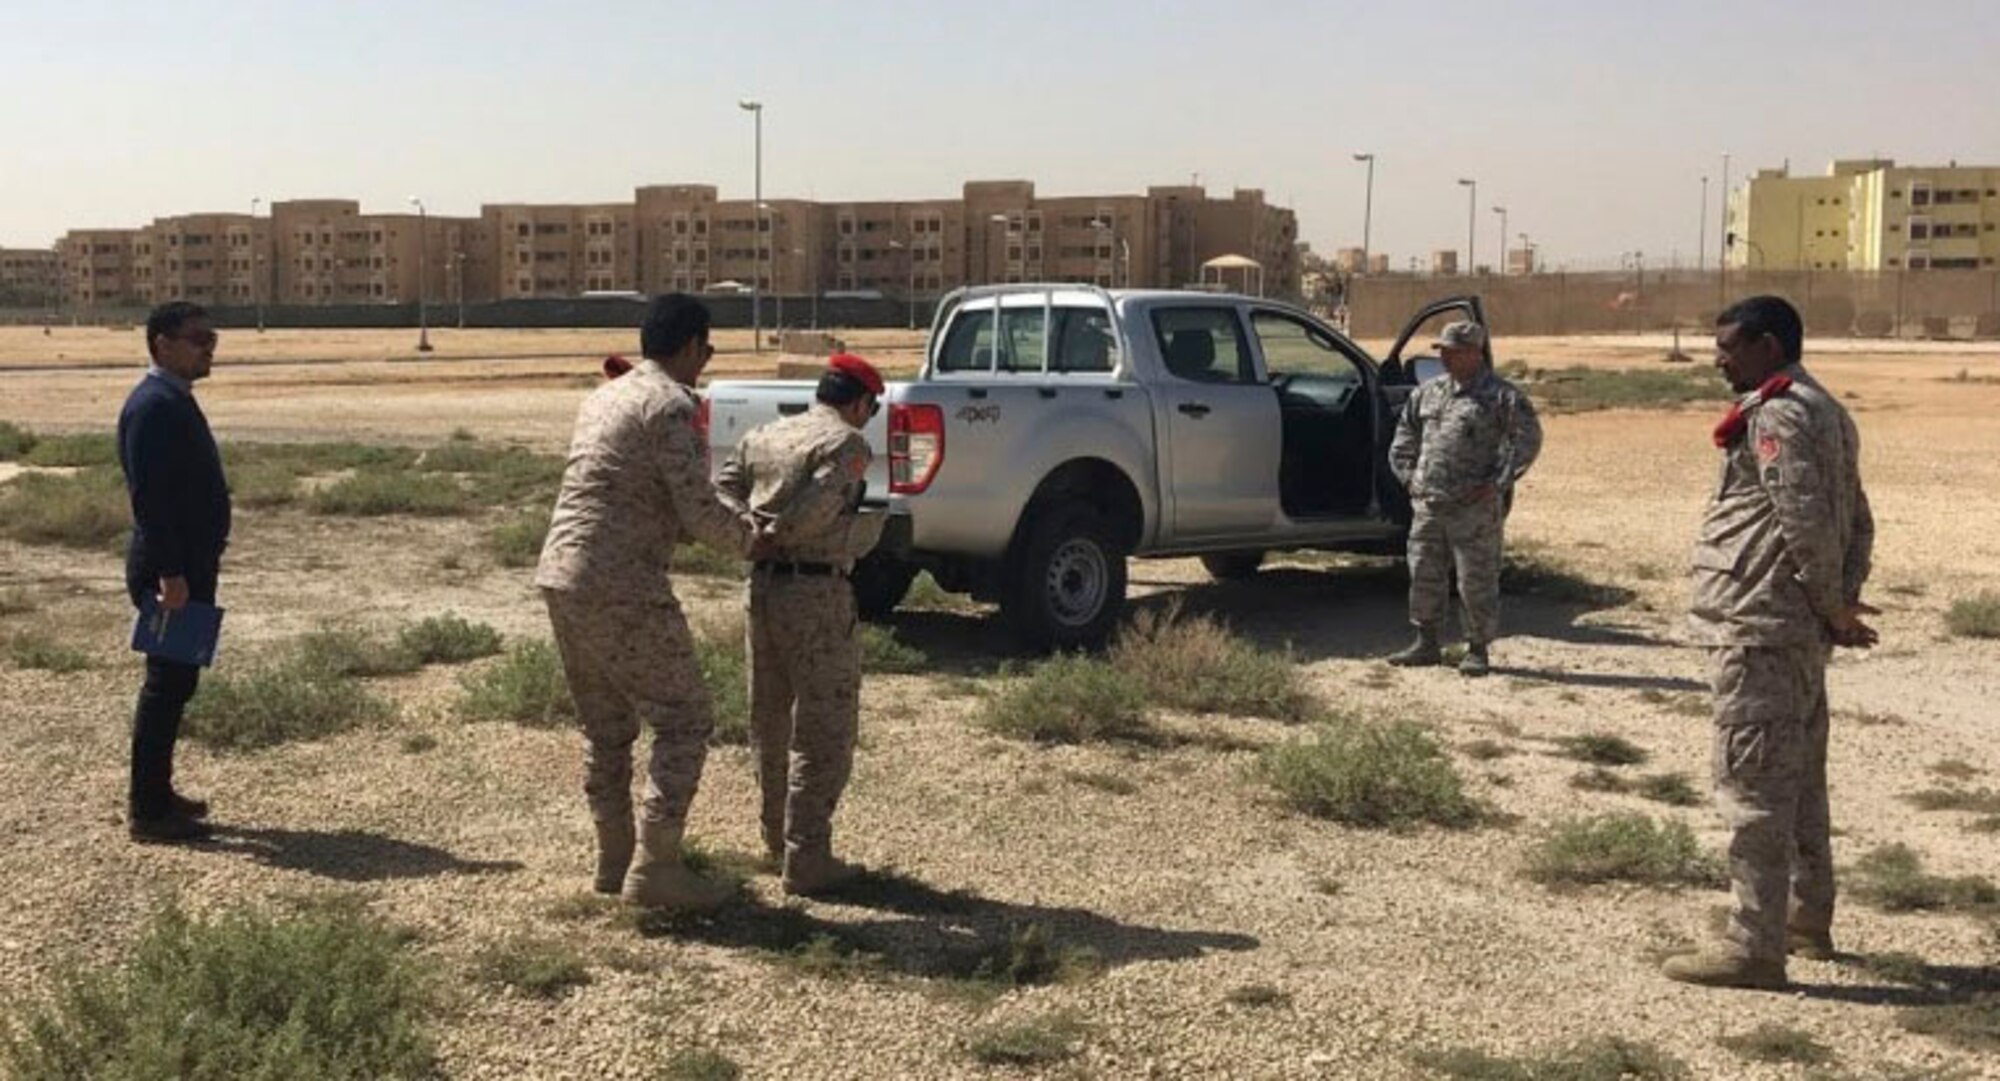 Members of the Saudi Arabia Ministry of Defense Military Police perform a high risk traffic stop during a three-week training exercise with the 879th Expeditionary Security Forces Squadron and Air Force Office of Special Investigations Detachment 243 at Eskan Village, Saudi Arabia, in March 2017. The training covered security protection, including formations for escorting, identifying explosives, vehicle searches, distinguished visitor convoys, reaction to contact and aggressive driving techniques. (U.S. Air Force photo/Senior Airman Cynthia Innocenti)